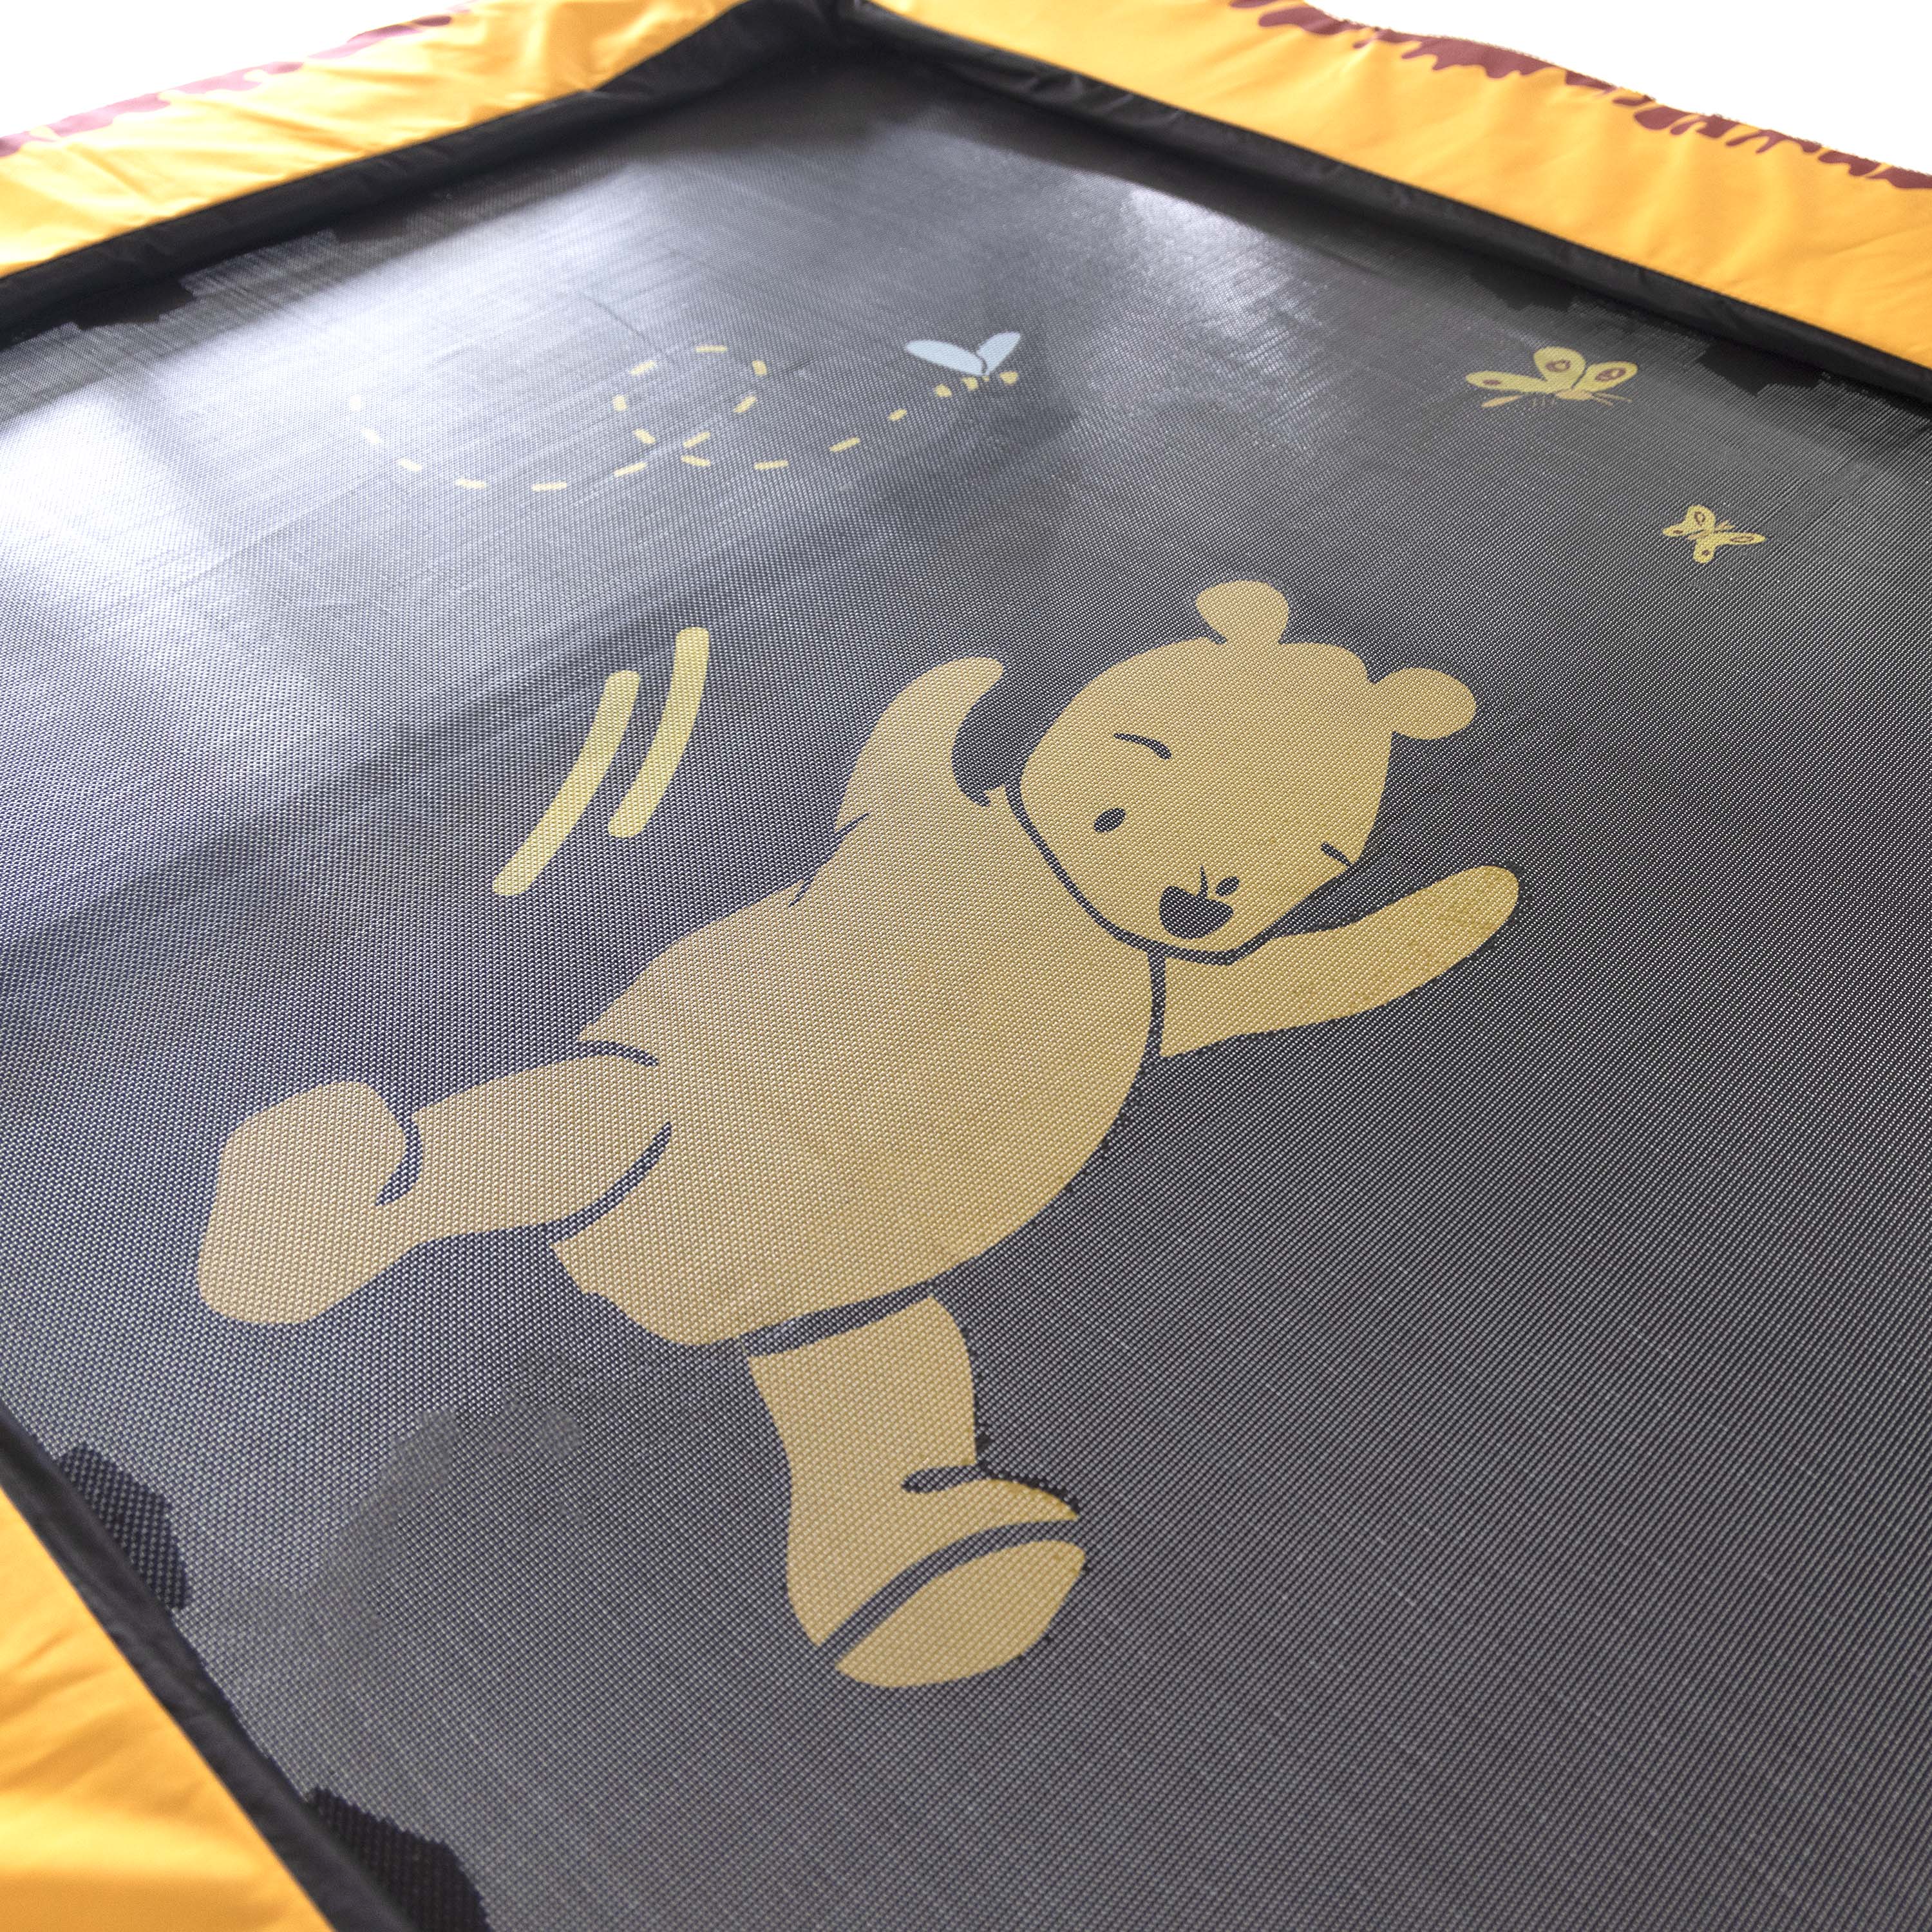 A nostalgic Winnie the Pooh design is printed onto the jump mat. 